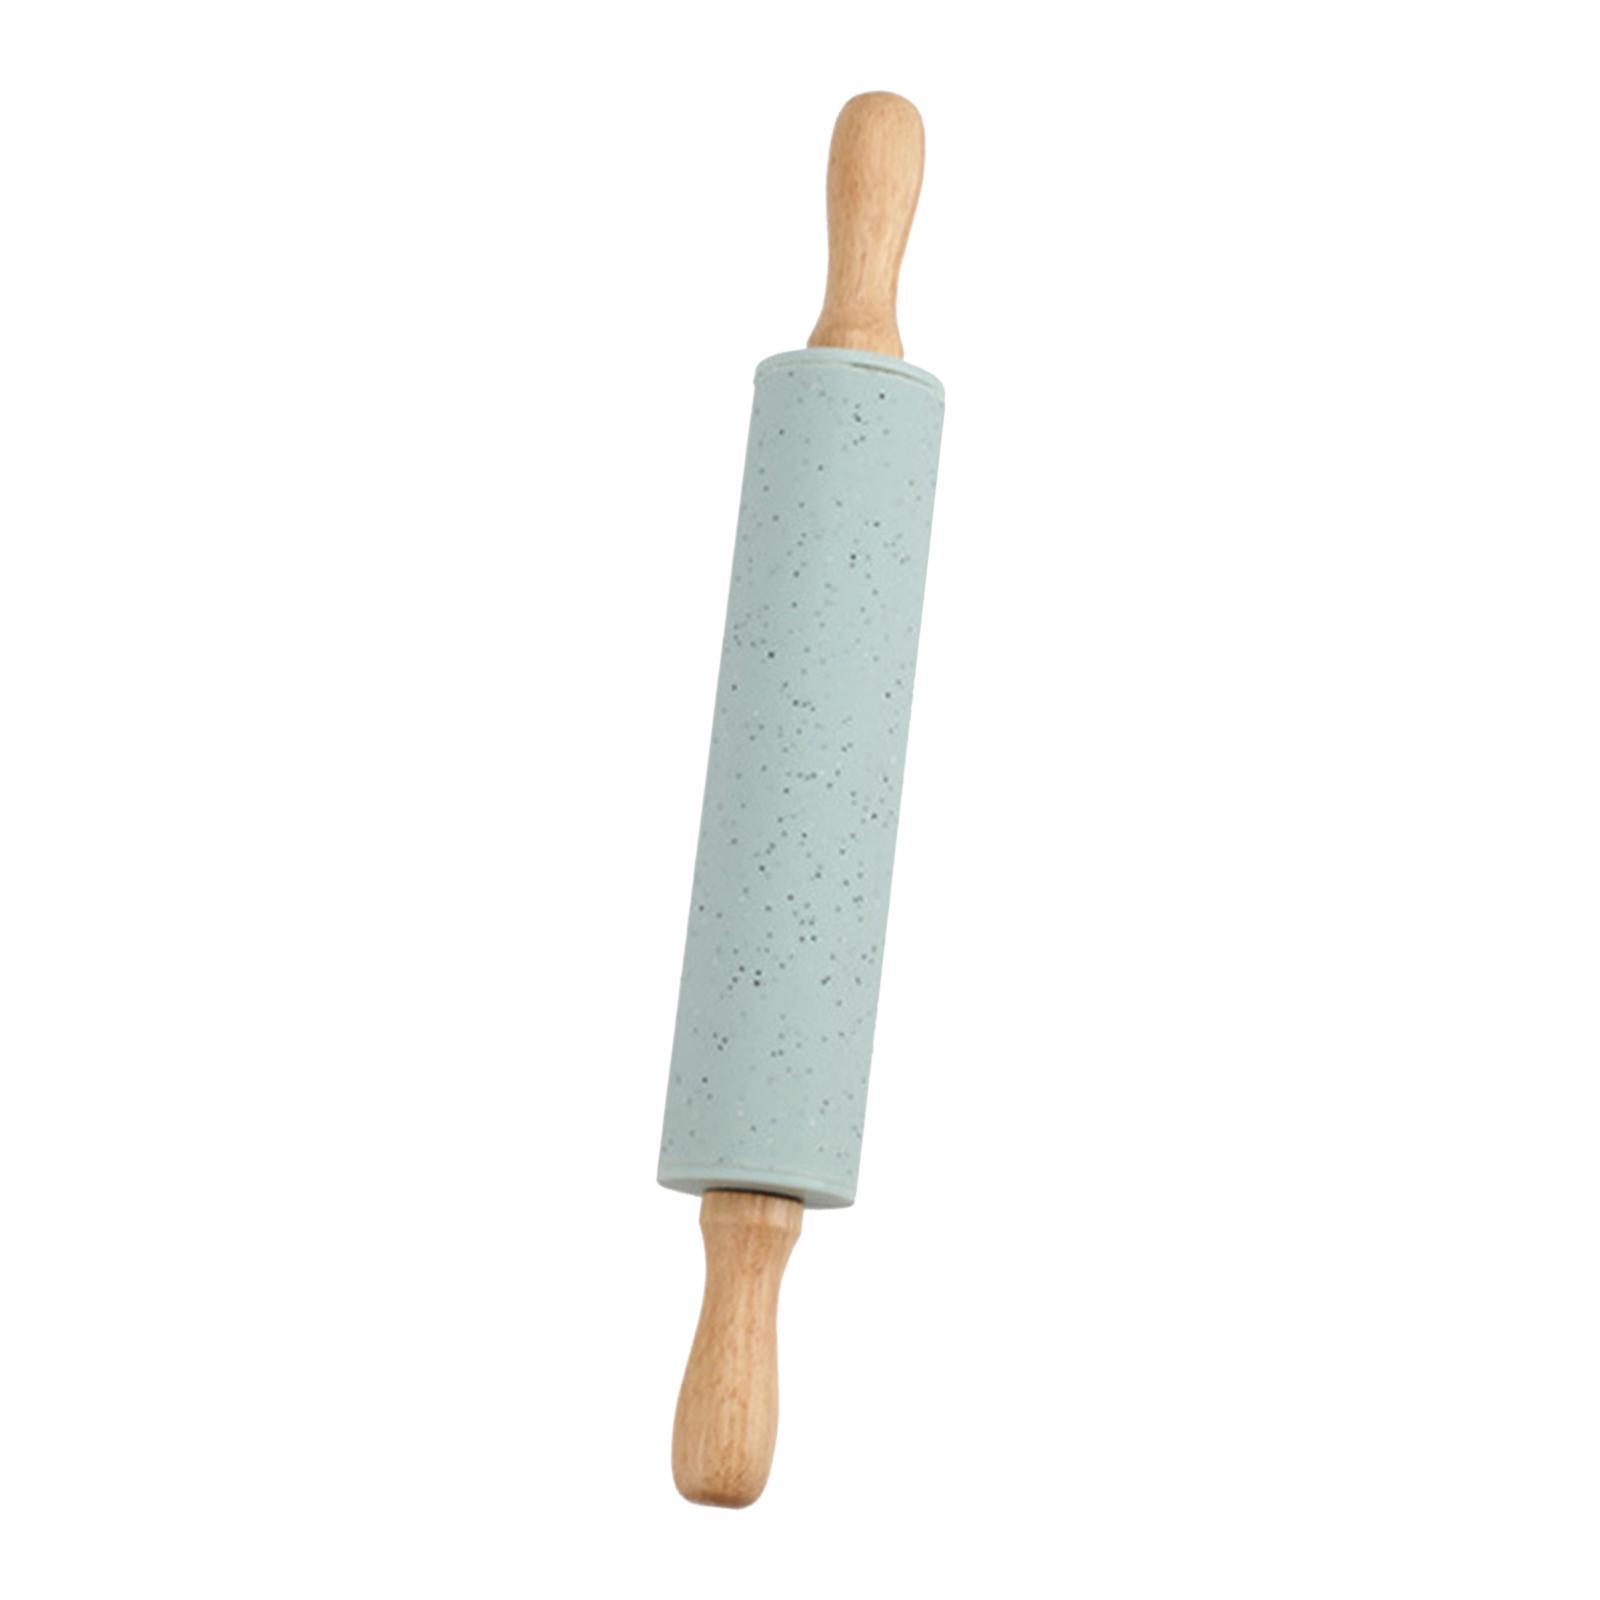 Wooden Rolling Pin for Baking Roller with Handles Handheld Easy Cleaning Roller Baking Tool for The Pastry Pizza Pie Kitchen Gadgets